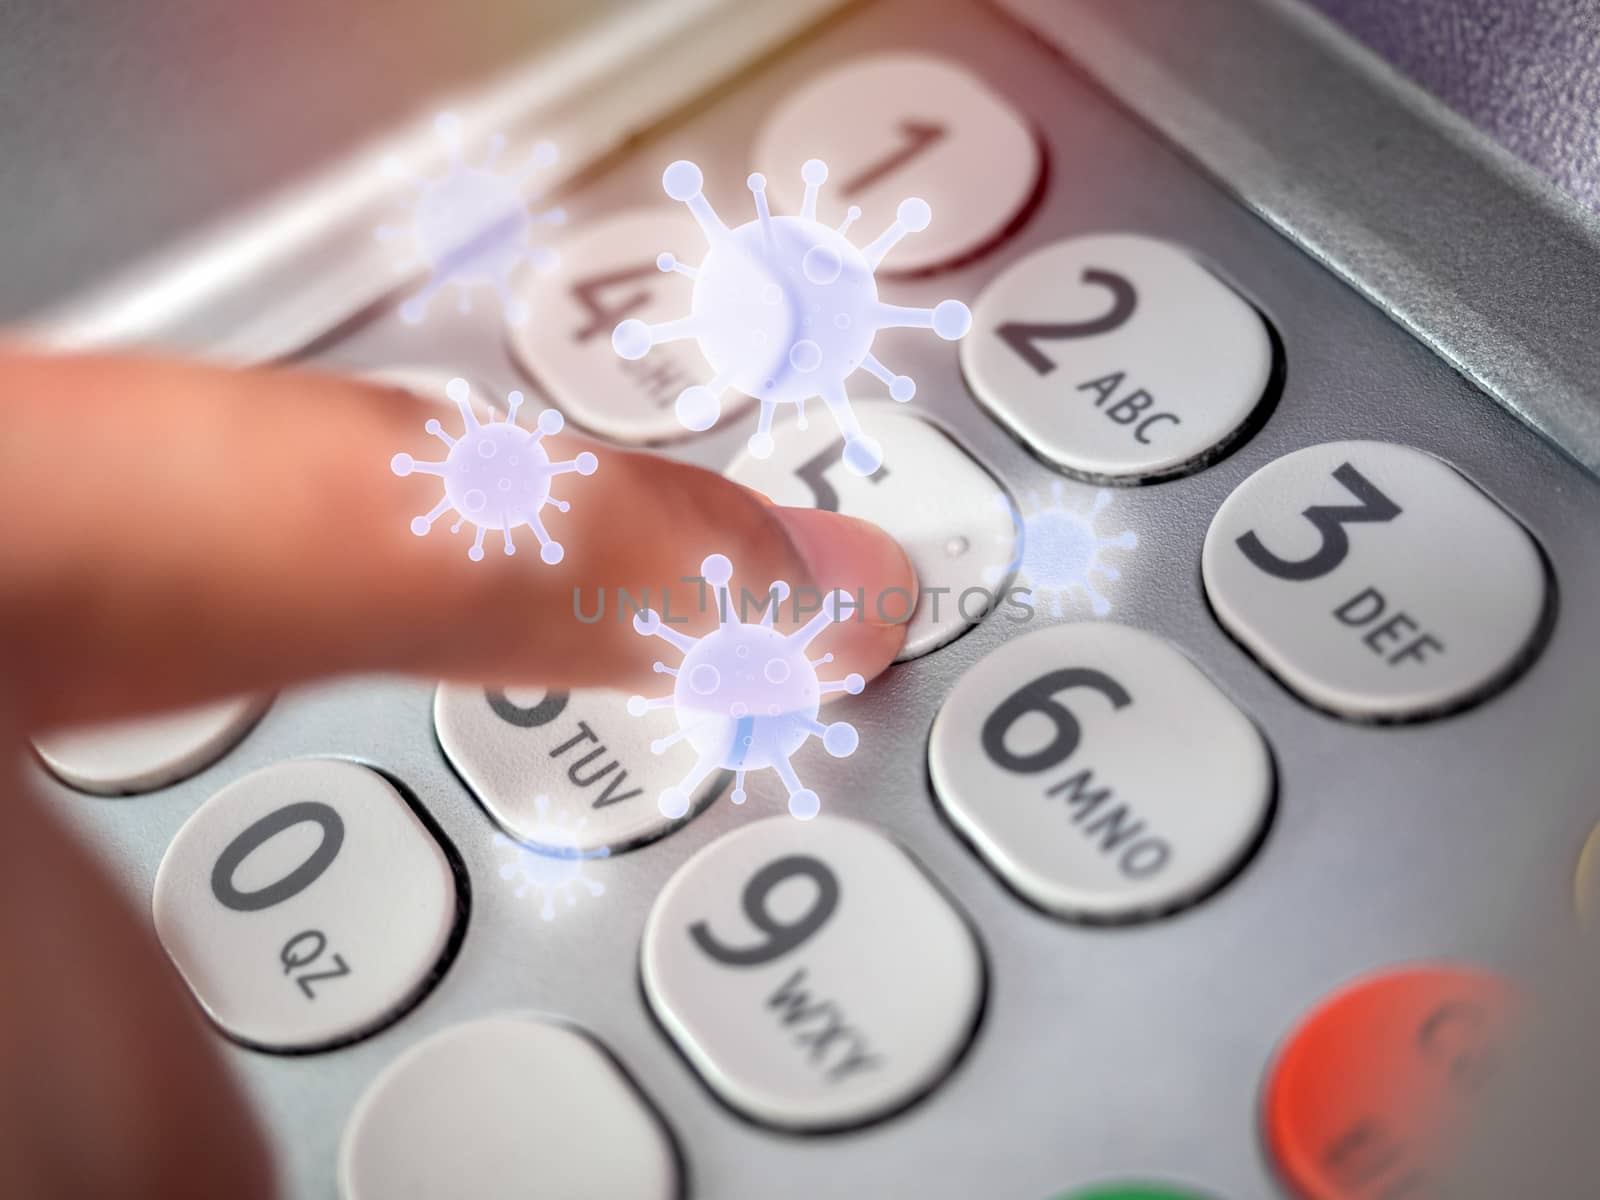 Finger pressing on number button on ATM machine with virus floating around. Virus infection spread disease concept.